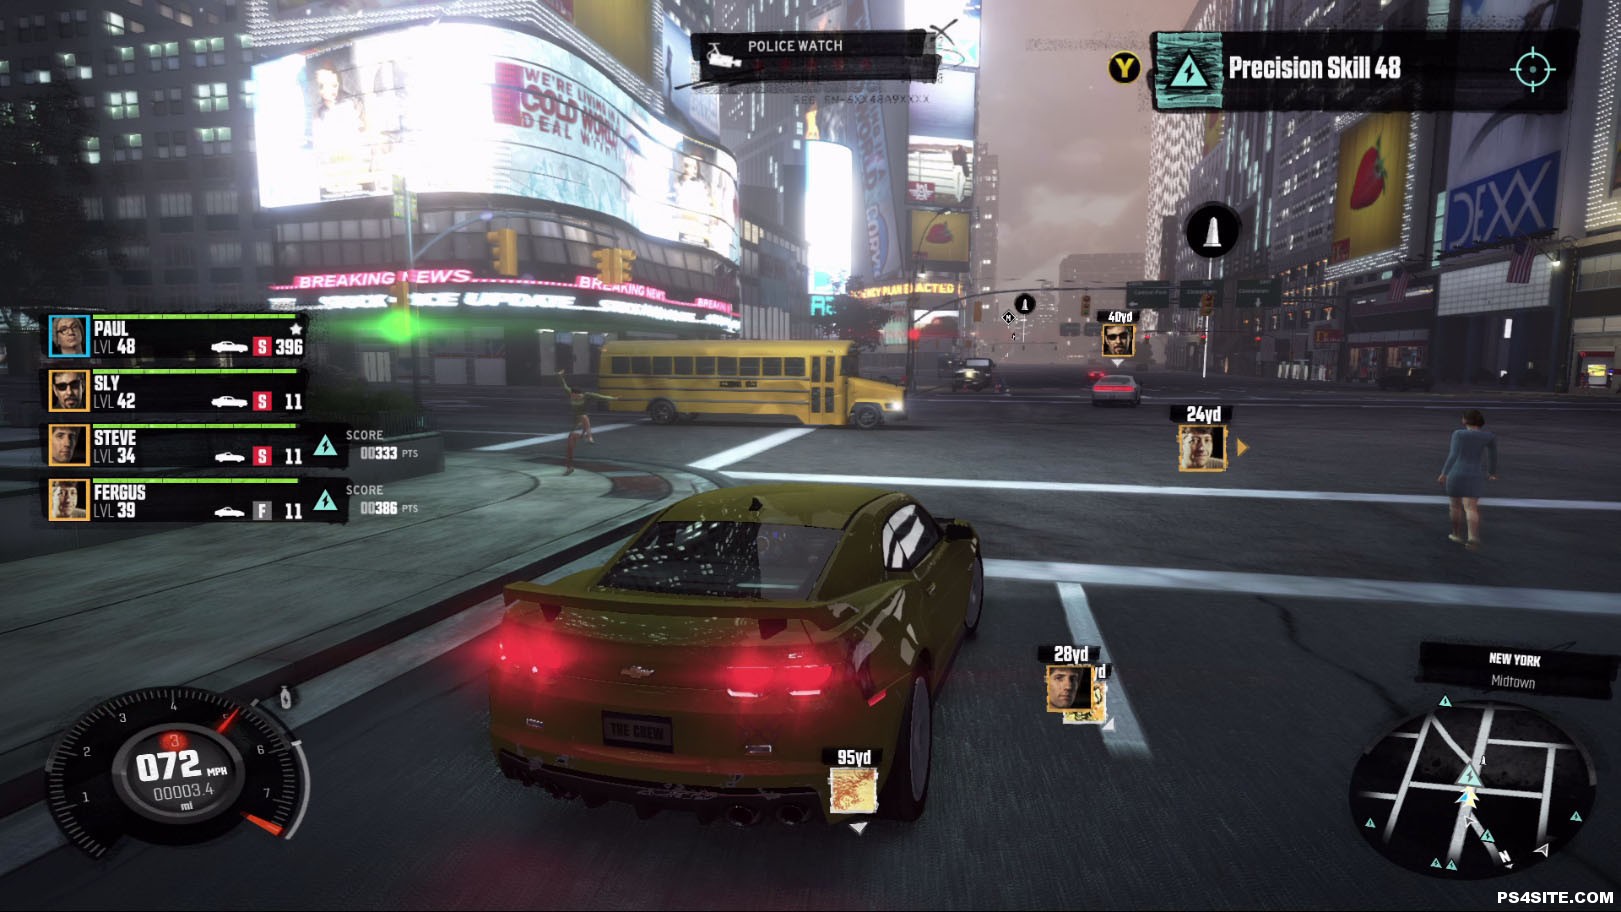 Don't Expect Any Early Reviews For The Crew - Giant Bomb